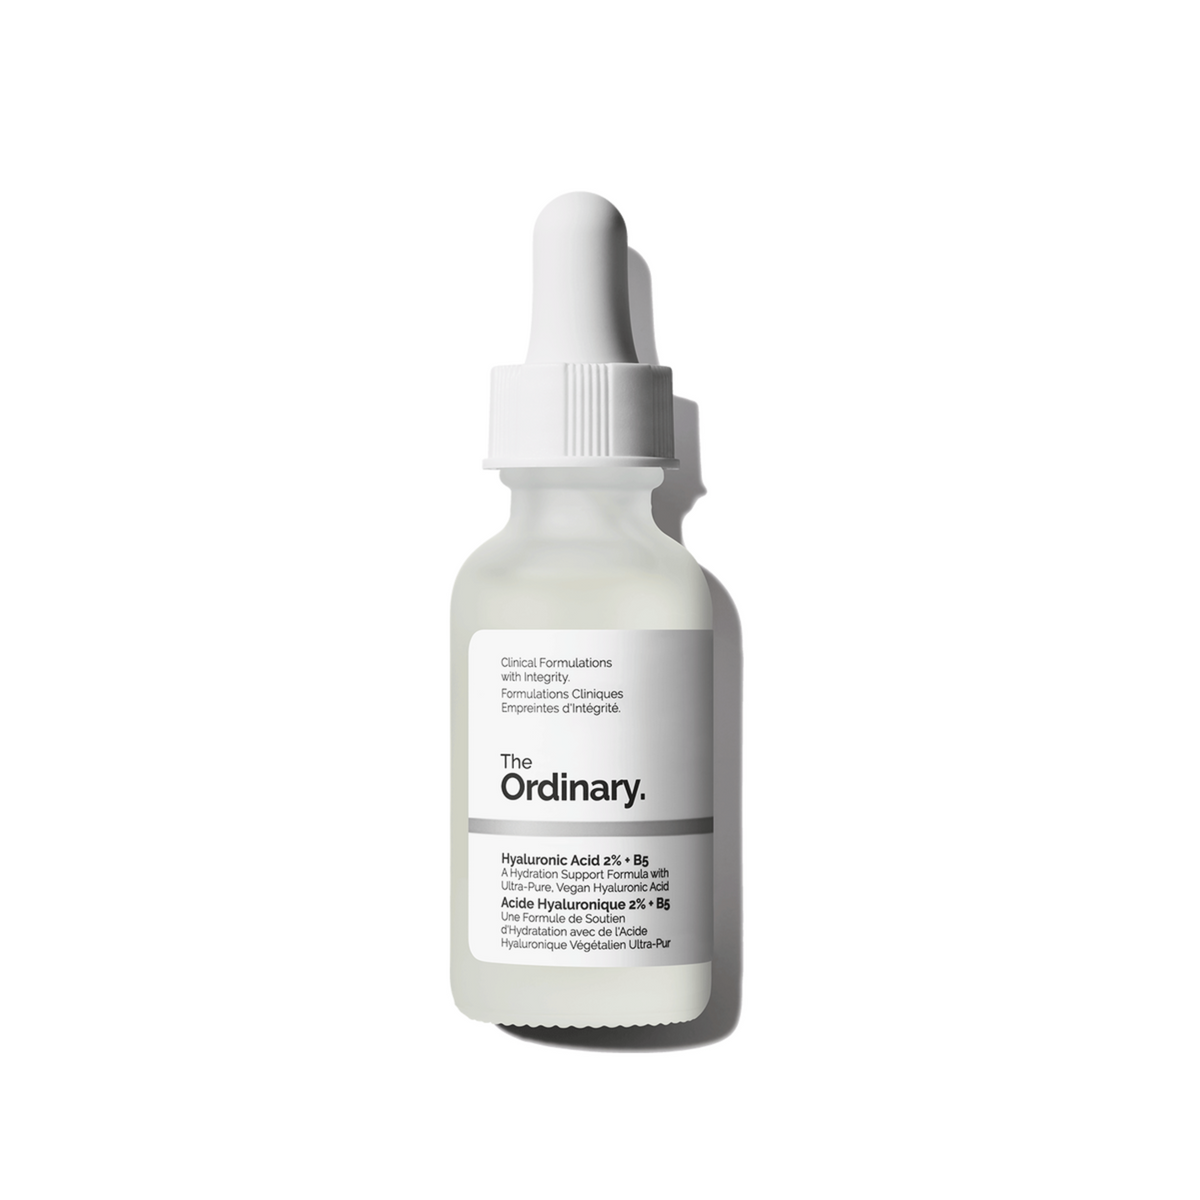 ACIDE HYALURONIQUE 2% + B5 THE ORDINARY - Premium  from DION - Just DA 3300! Shop now at DION